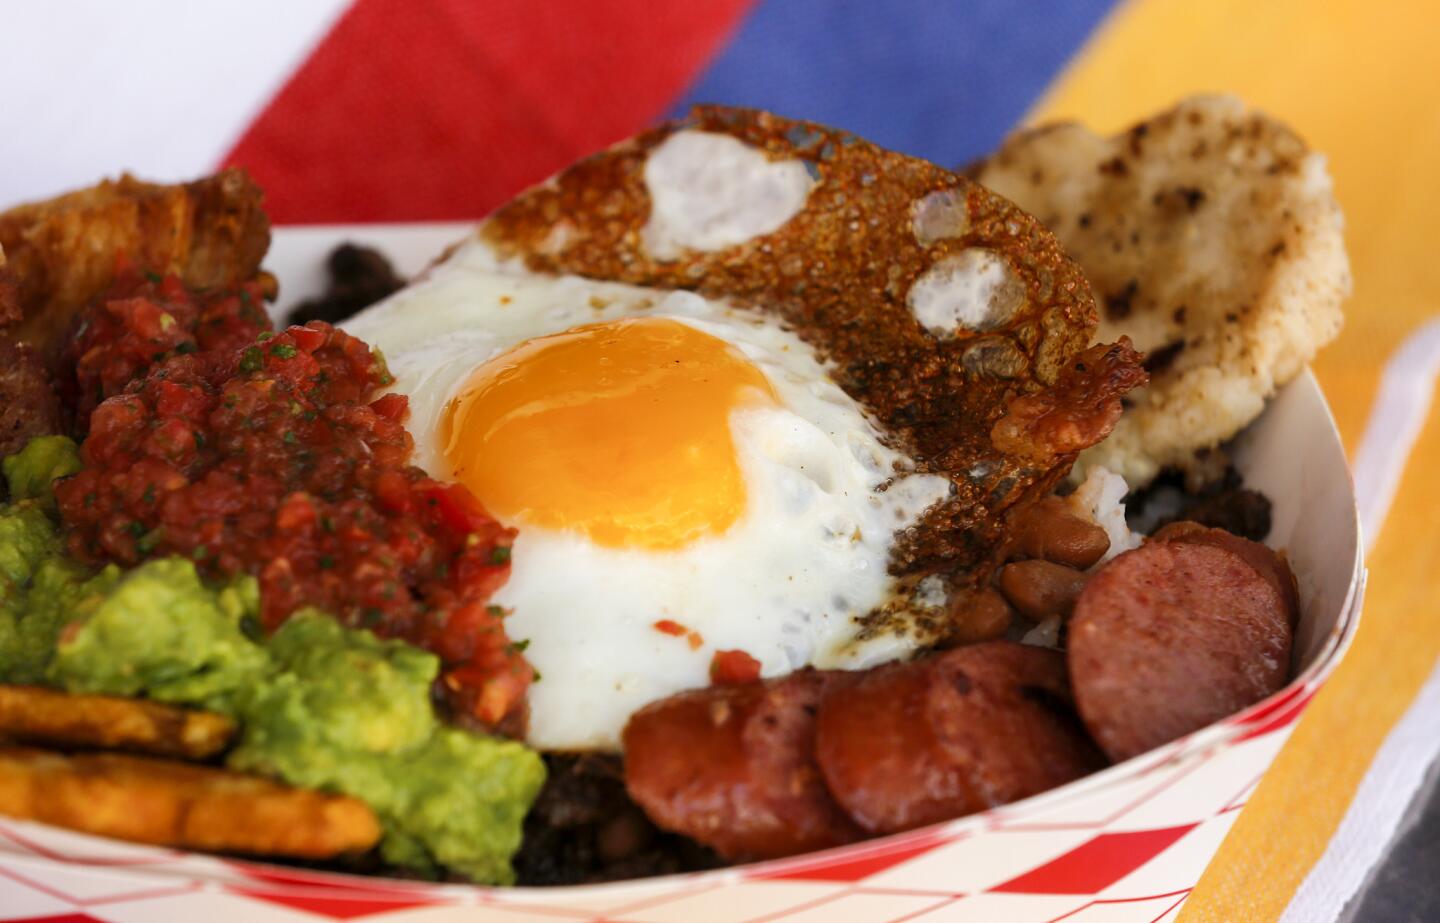 The Paisa Bowl is a protein-packed serving of pork belly, steak, sausage, beans, white rice, plantains, avocado and an arepa topped with a fried egg, from the Cali Fresh food truck.